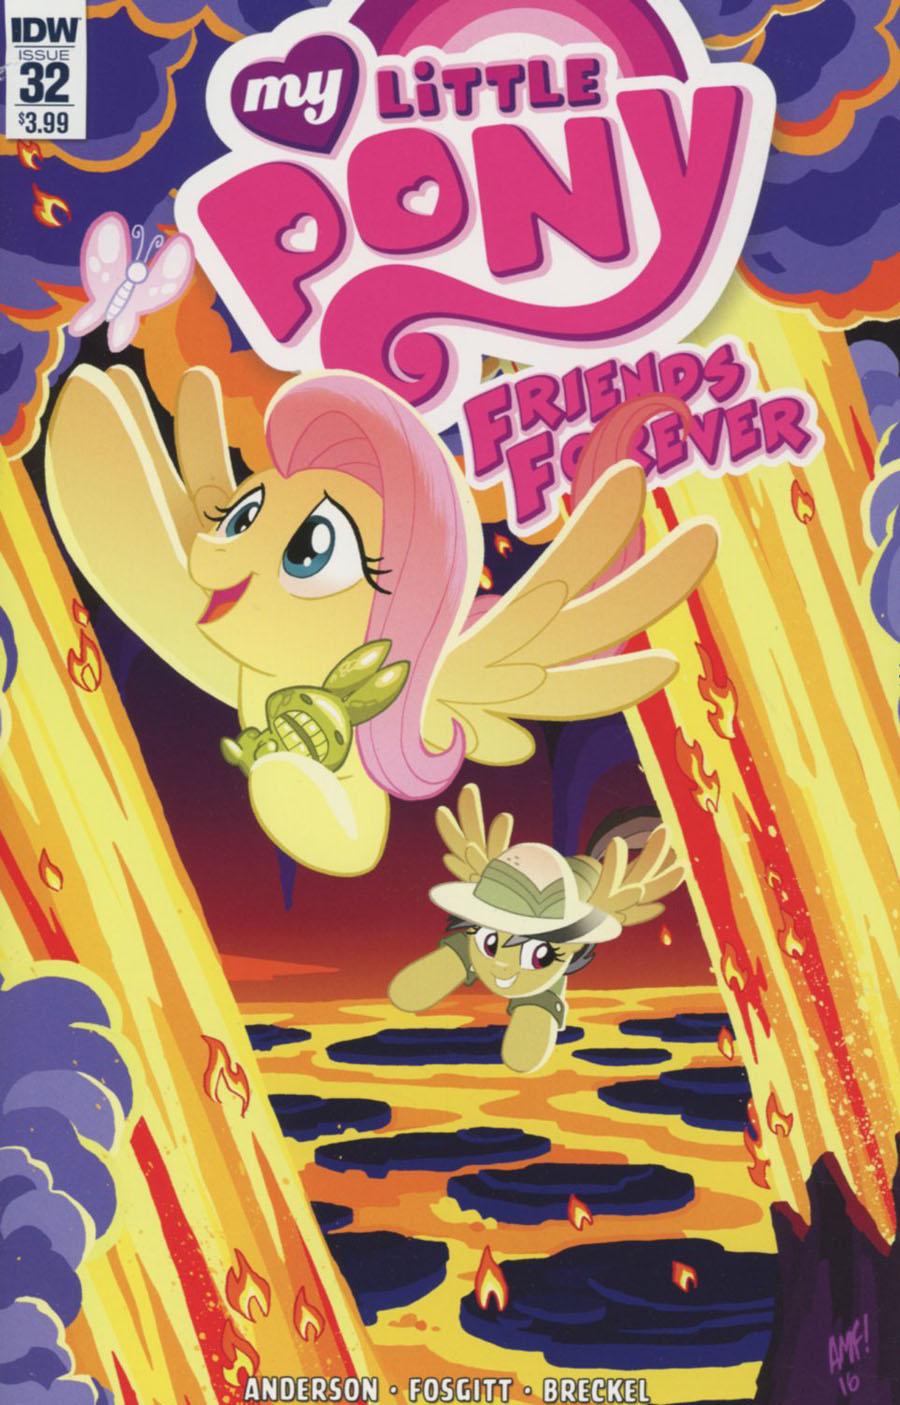 My Little Pony Friends Forever Vol. 1 #32